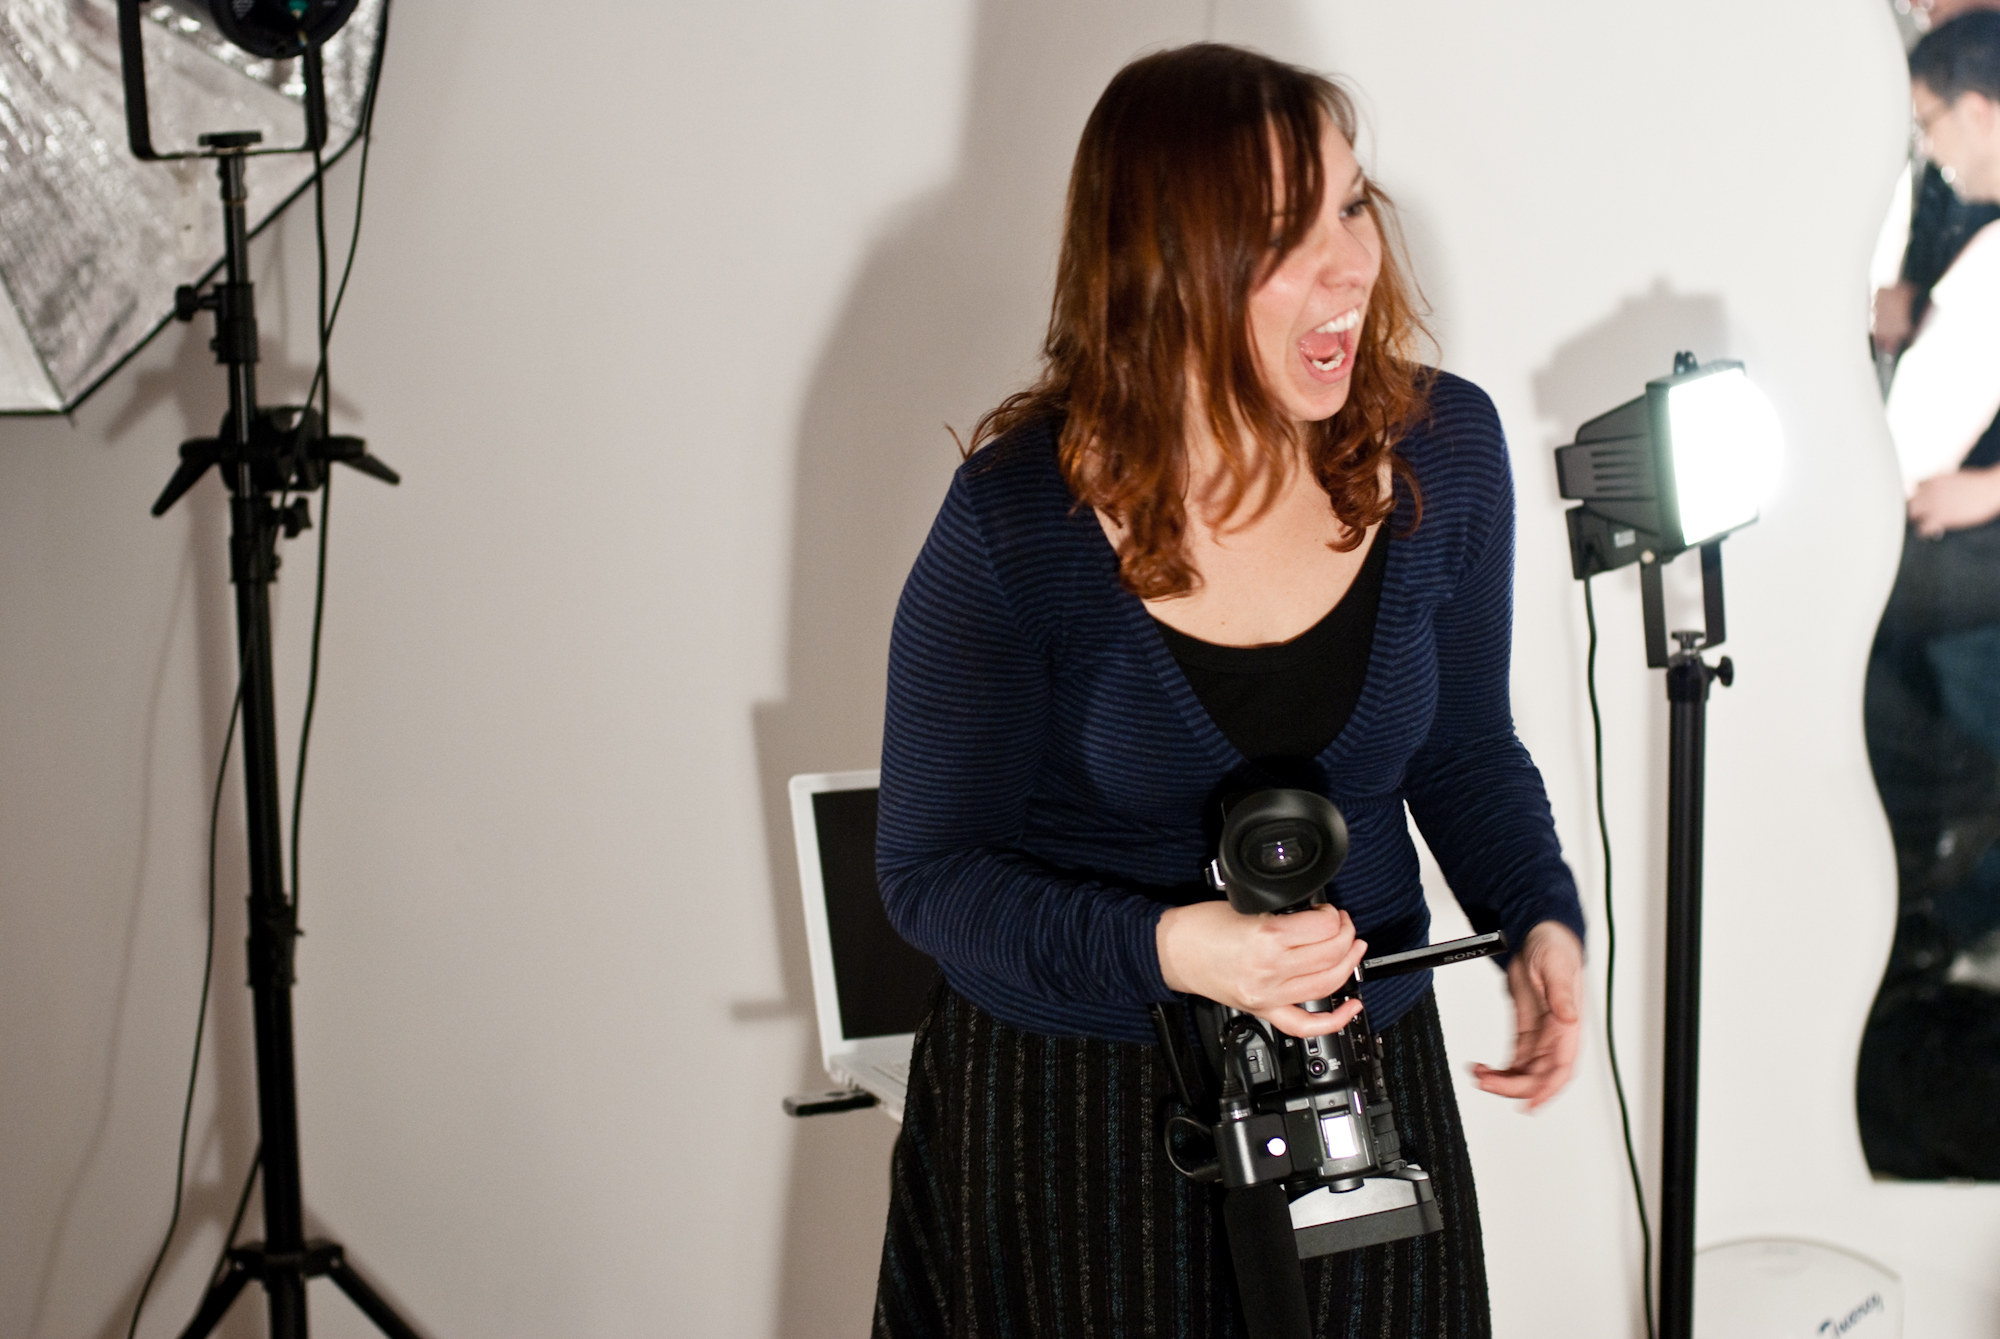 the woman is laughing while holding a video camera